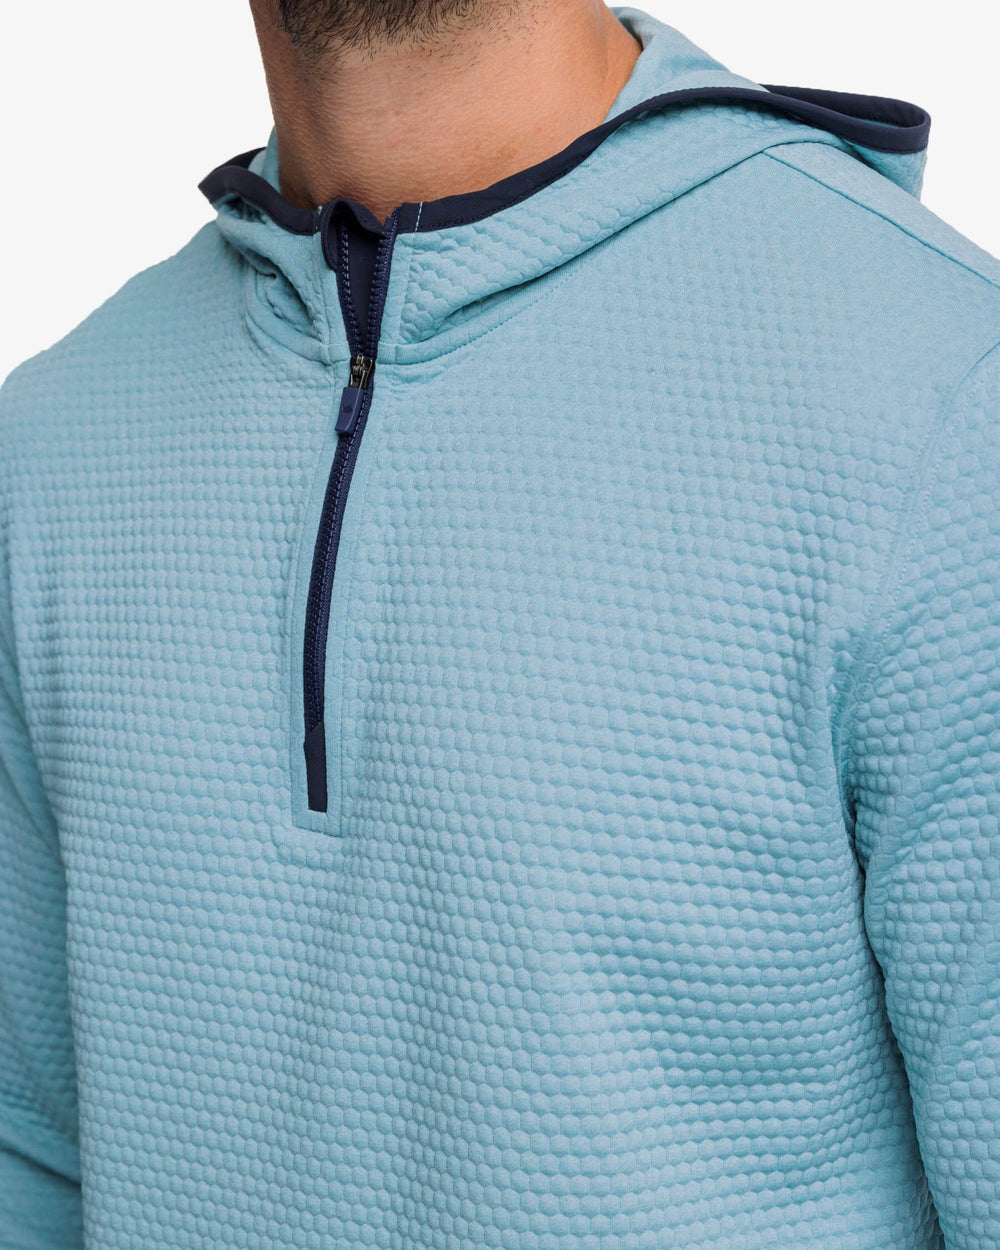 The detail view of the Southern Tide Scuttle Heather Performance Quarter Zip Hoodie by Southern Tide - Heather Ocean Teal